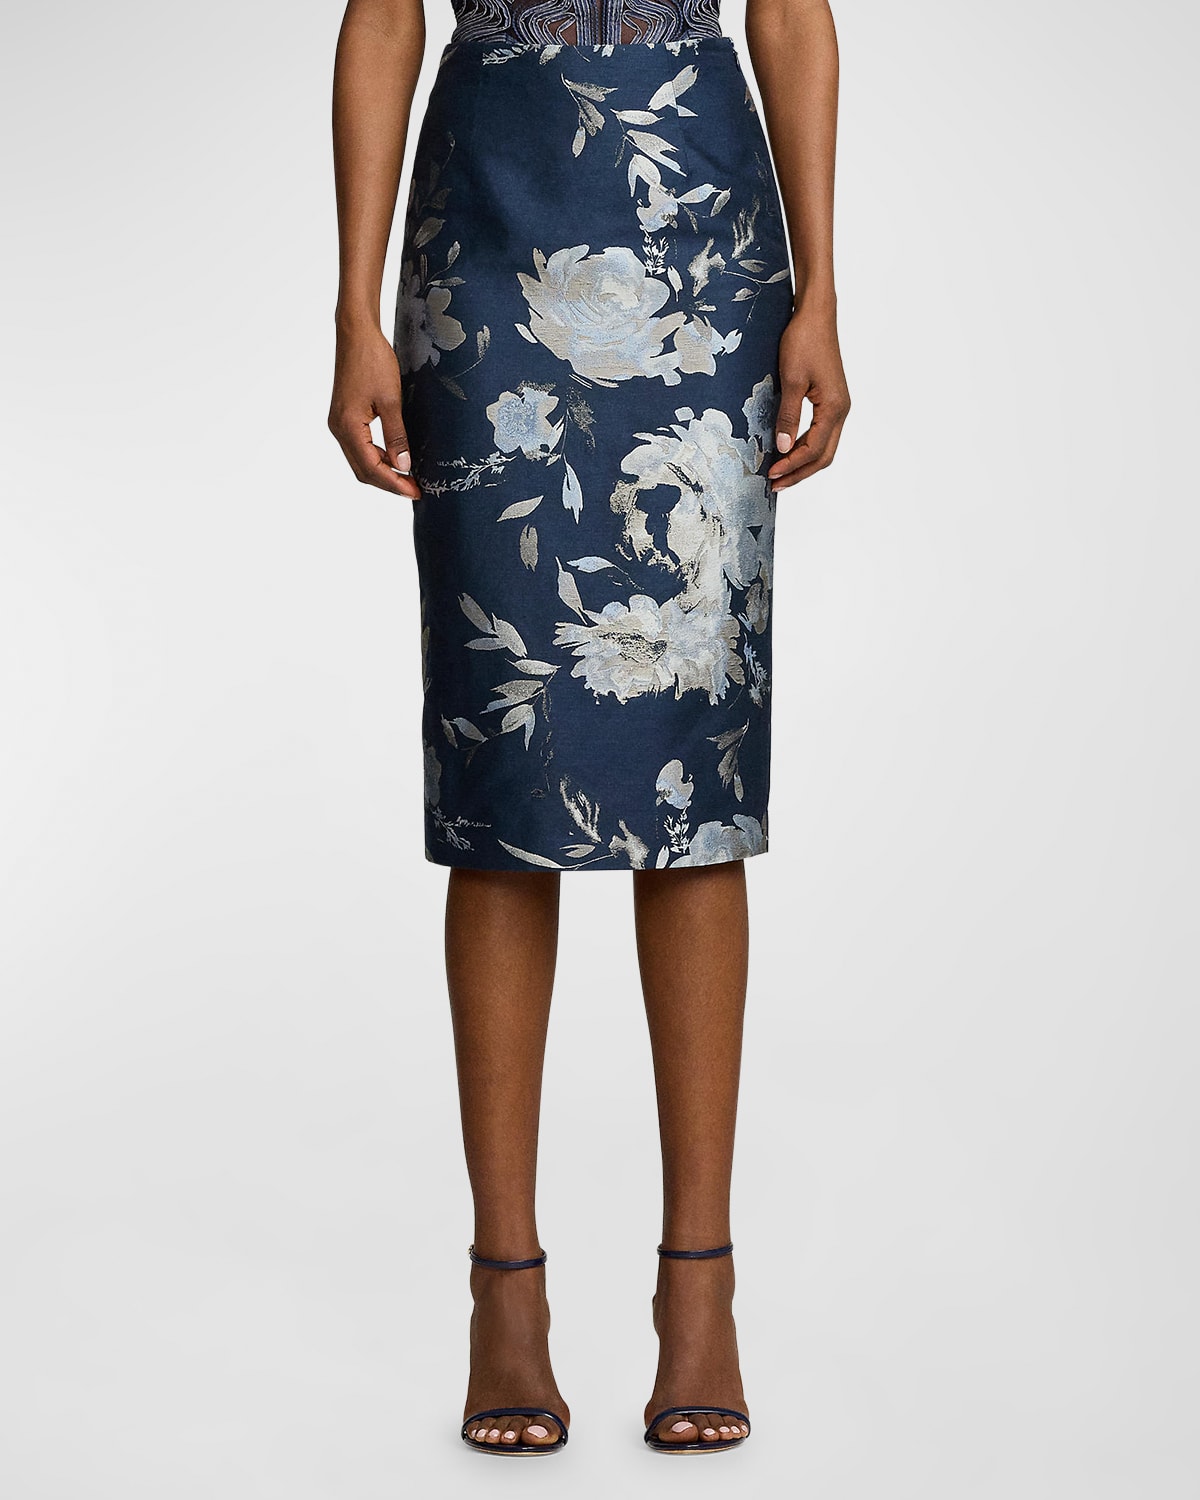 Whitley Floral Jacquard Pencil Skirt